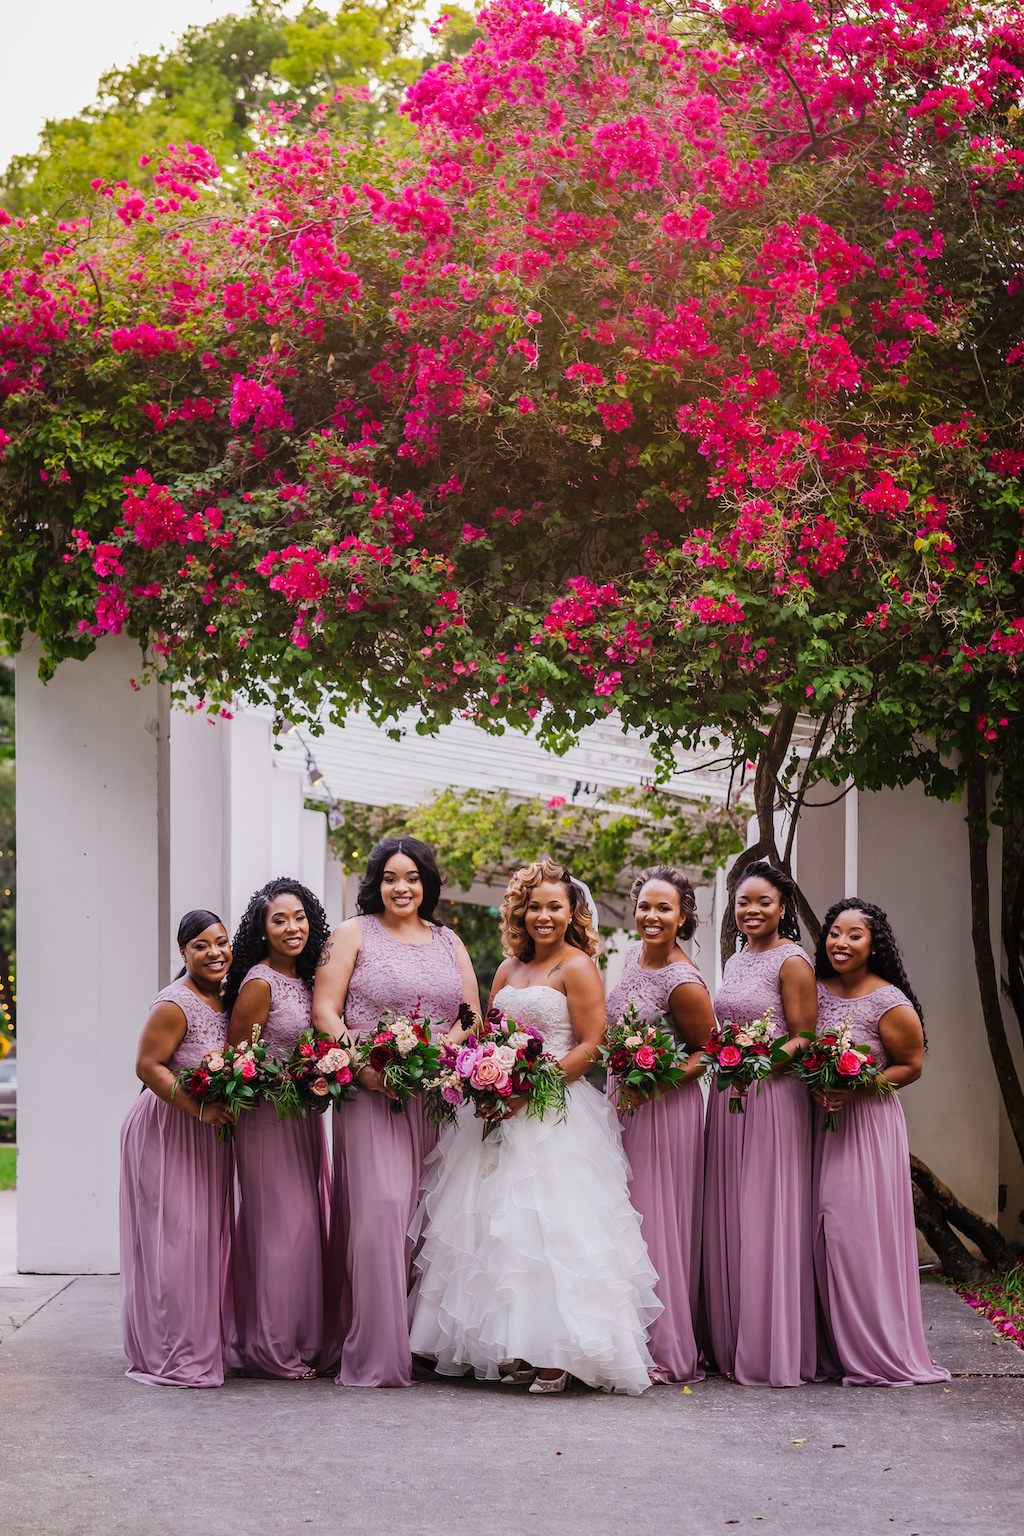 Tampa Bay Bride and Bridesmaids in Modern David's Bridal Long Purple Dresses, Bride Wearing Strapless Ballgown Wedding Dress, Holding Romantic Textured Floral Bouquet, With Blush Pink Roses, Burgundy Flowers, Hibiscuses, Quartz and Magenta Florals, Dark Greenery and Gold Accents, at Downtown St. Pete Straub Park